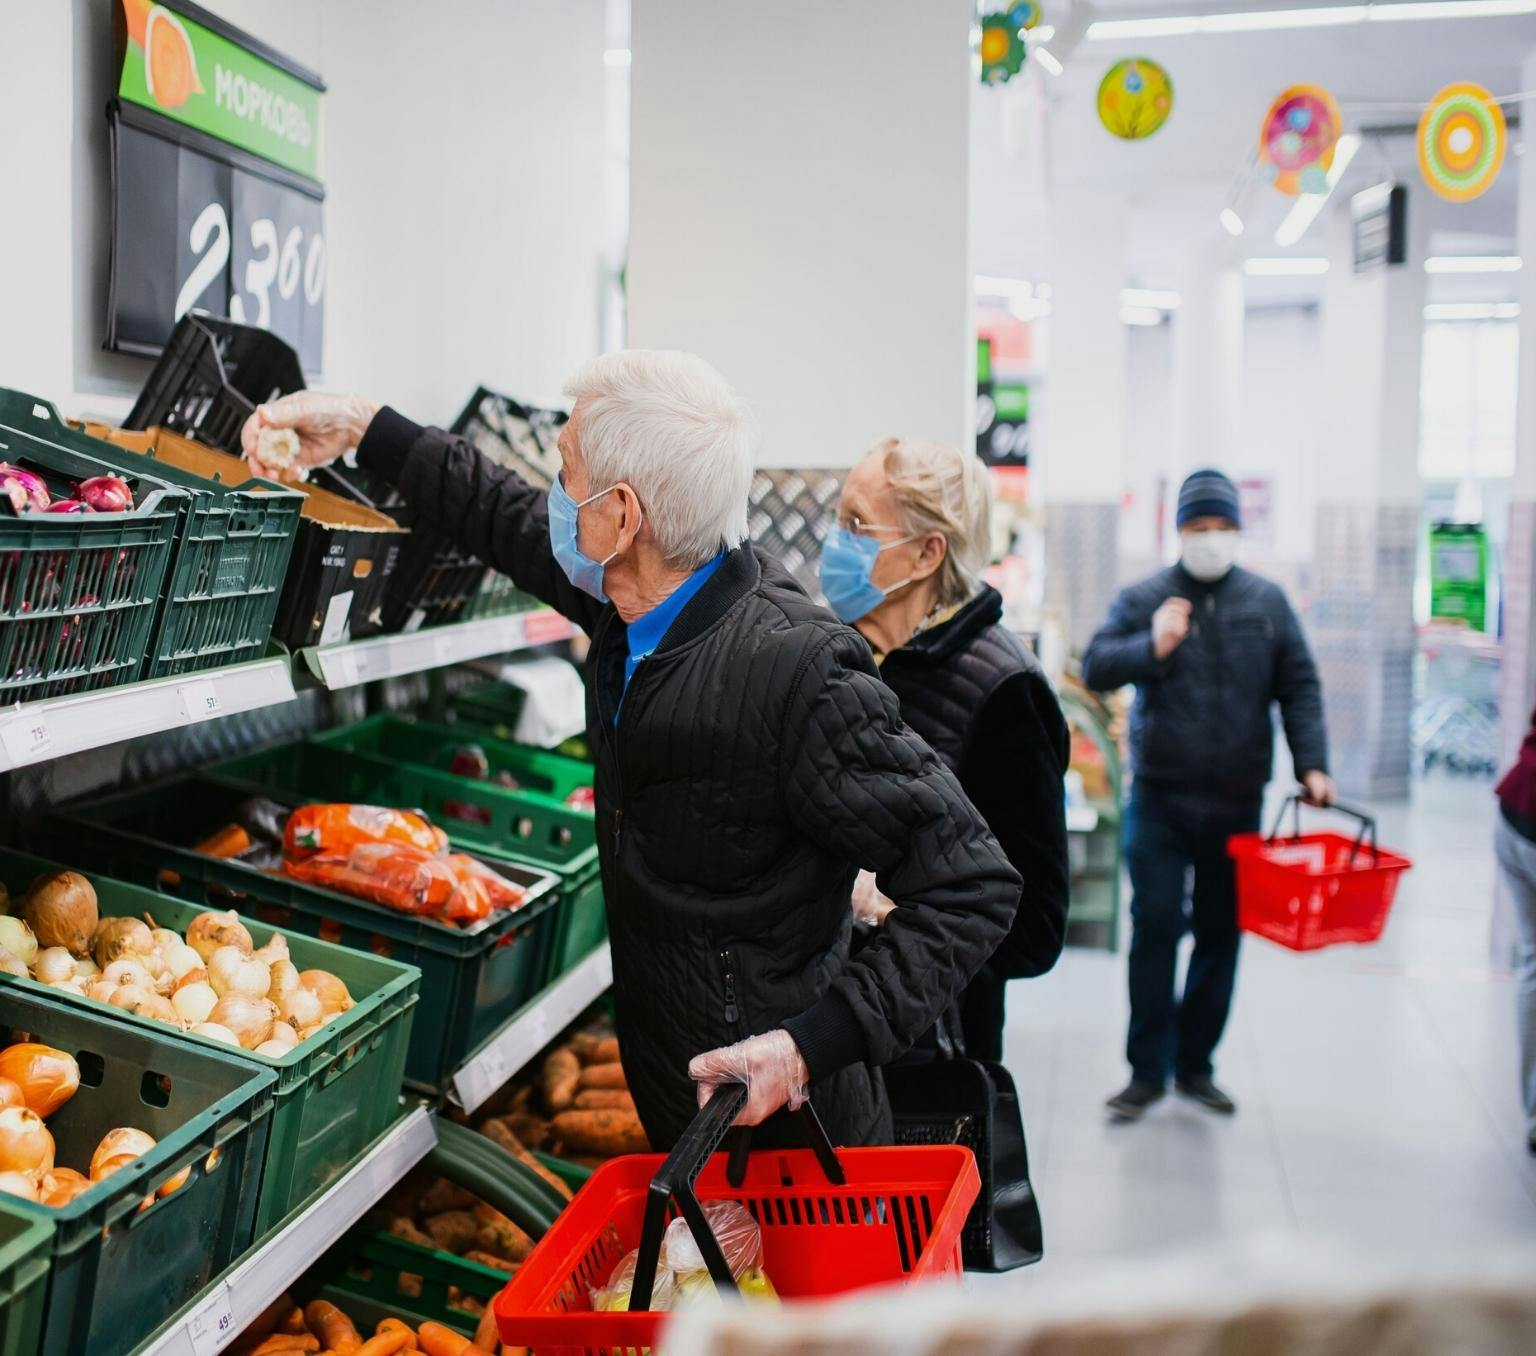 Man and woman with white hair, black hair and blue masks. They are facing a wall of fruit and vegetables in a supermarket. The man is reaching for a bulb of garlic.